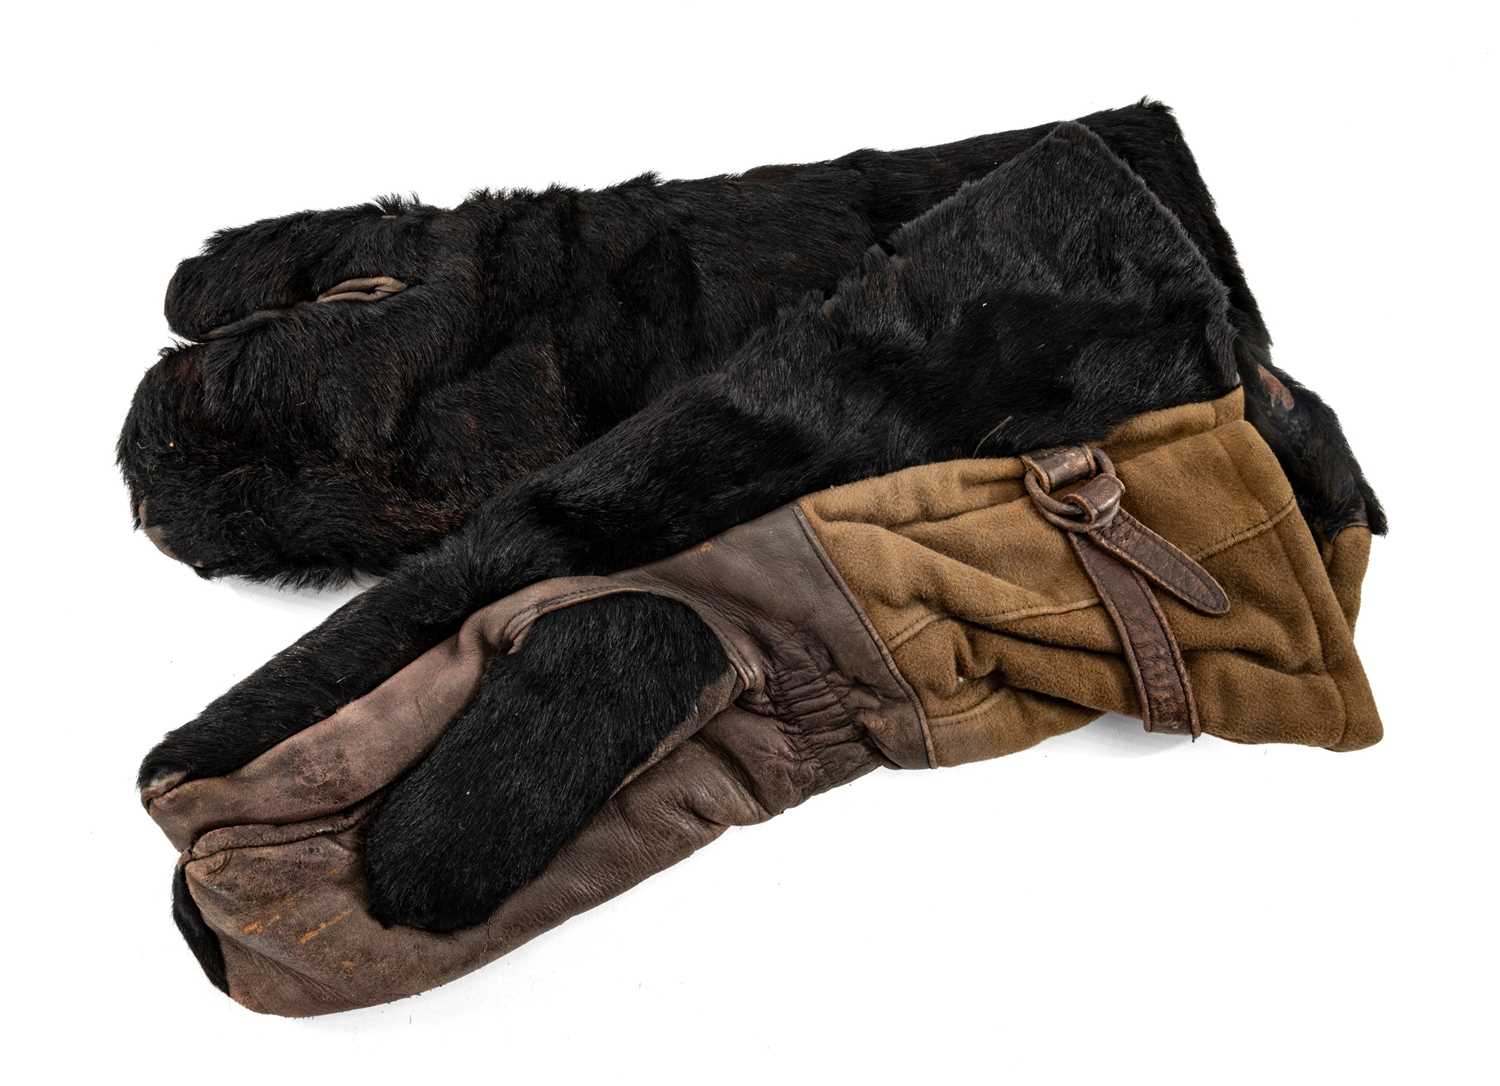 THE MILITARY CLUB HOUSE: PAIR OF GLOVES believed horse-hair lined interior and outer, leather